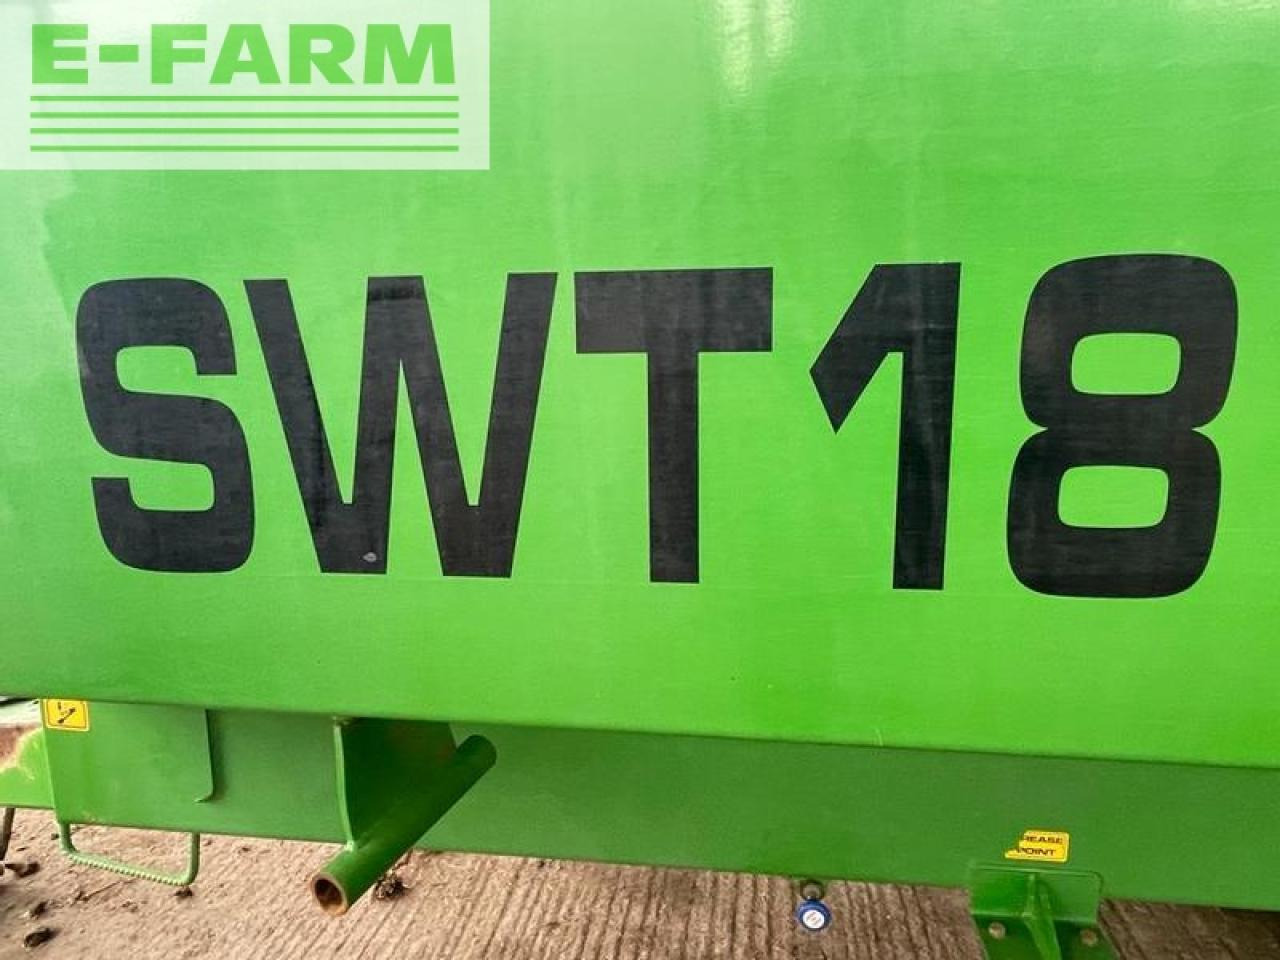 Tractor agricol Richard Western swt 18t: Foto 8